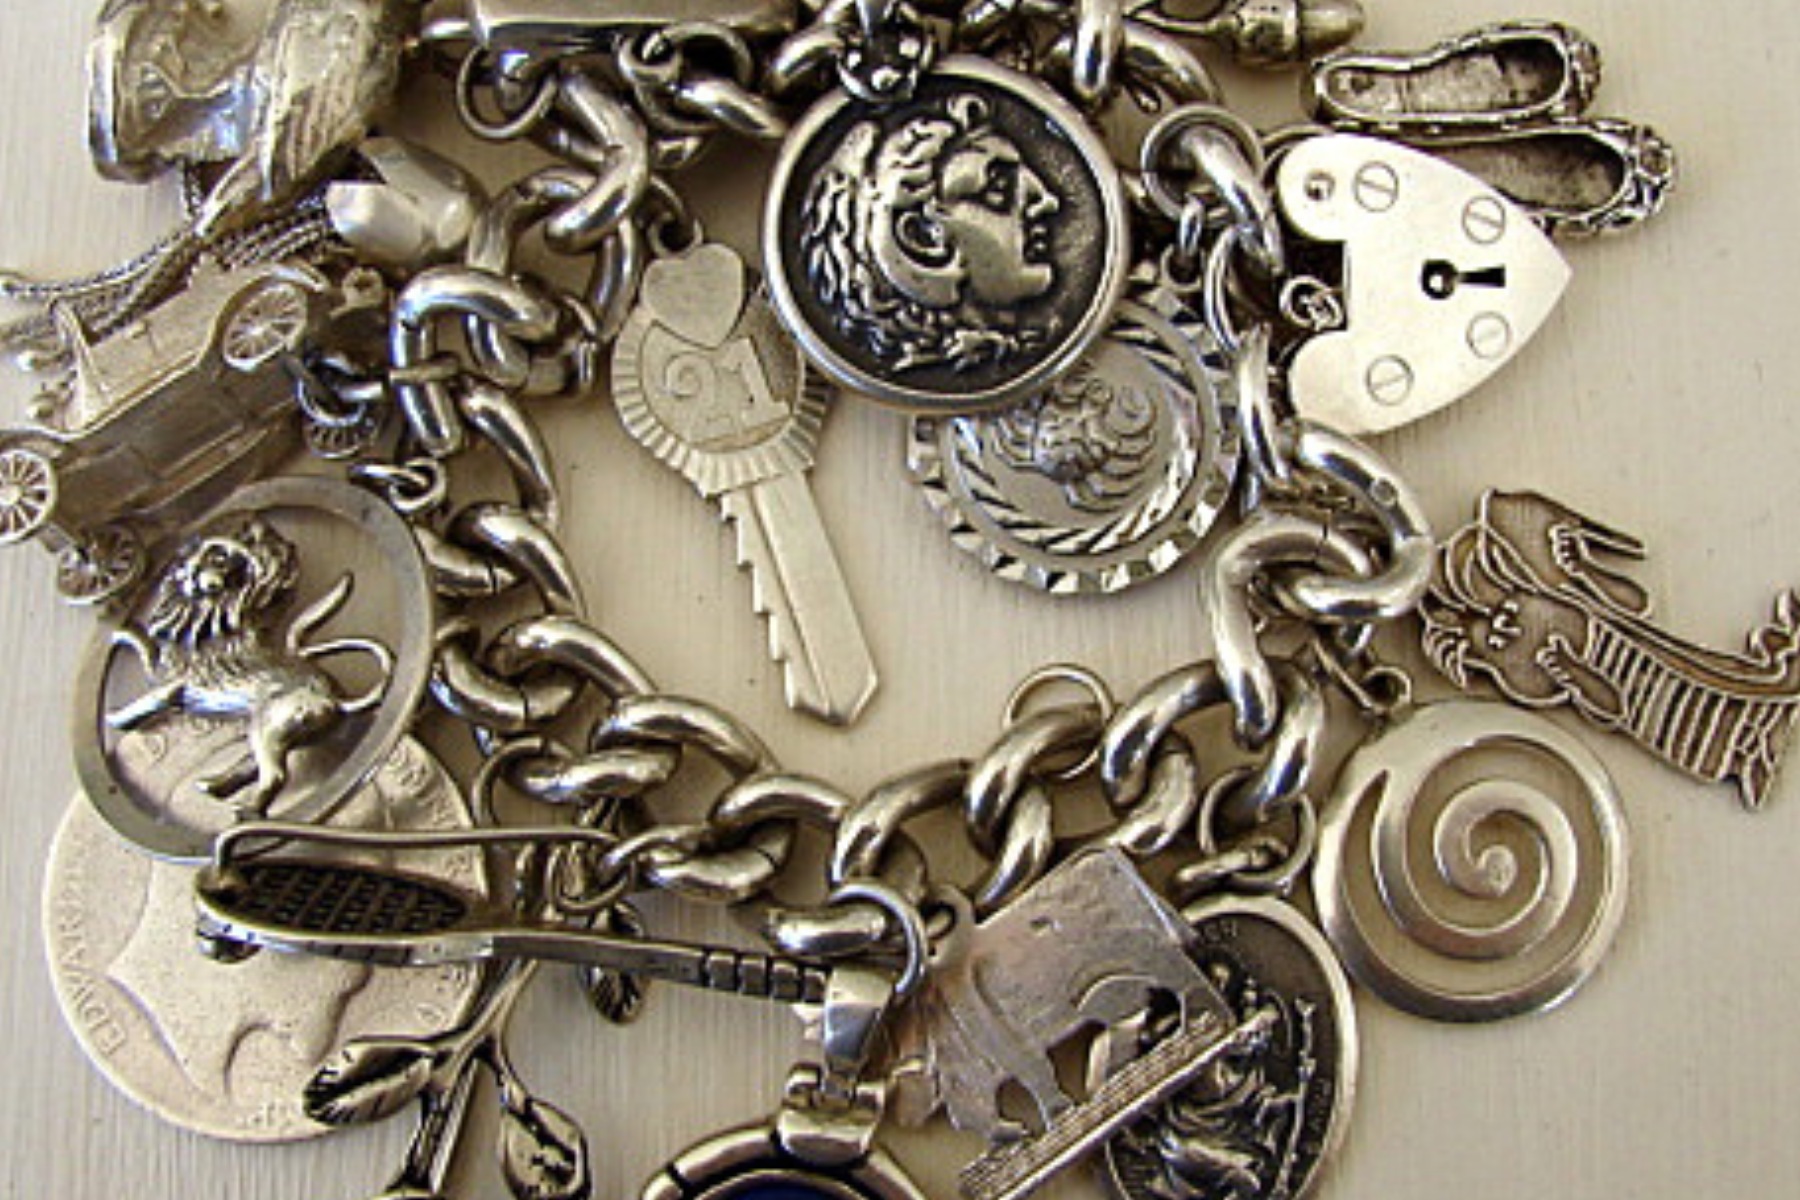 Jewelry with old charms